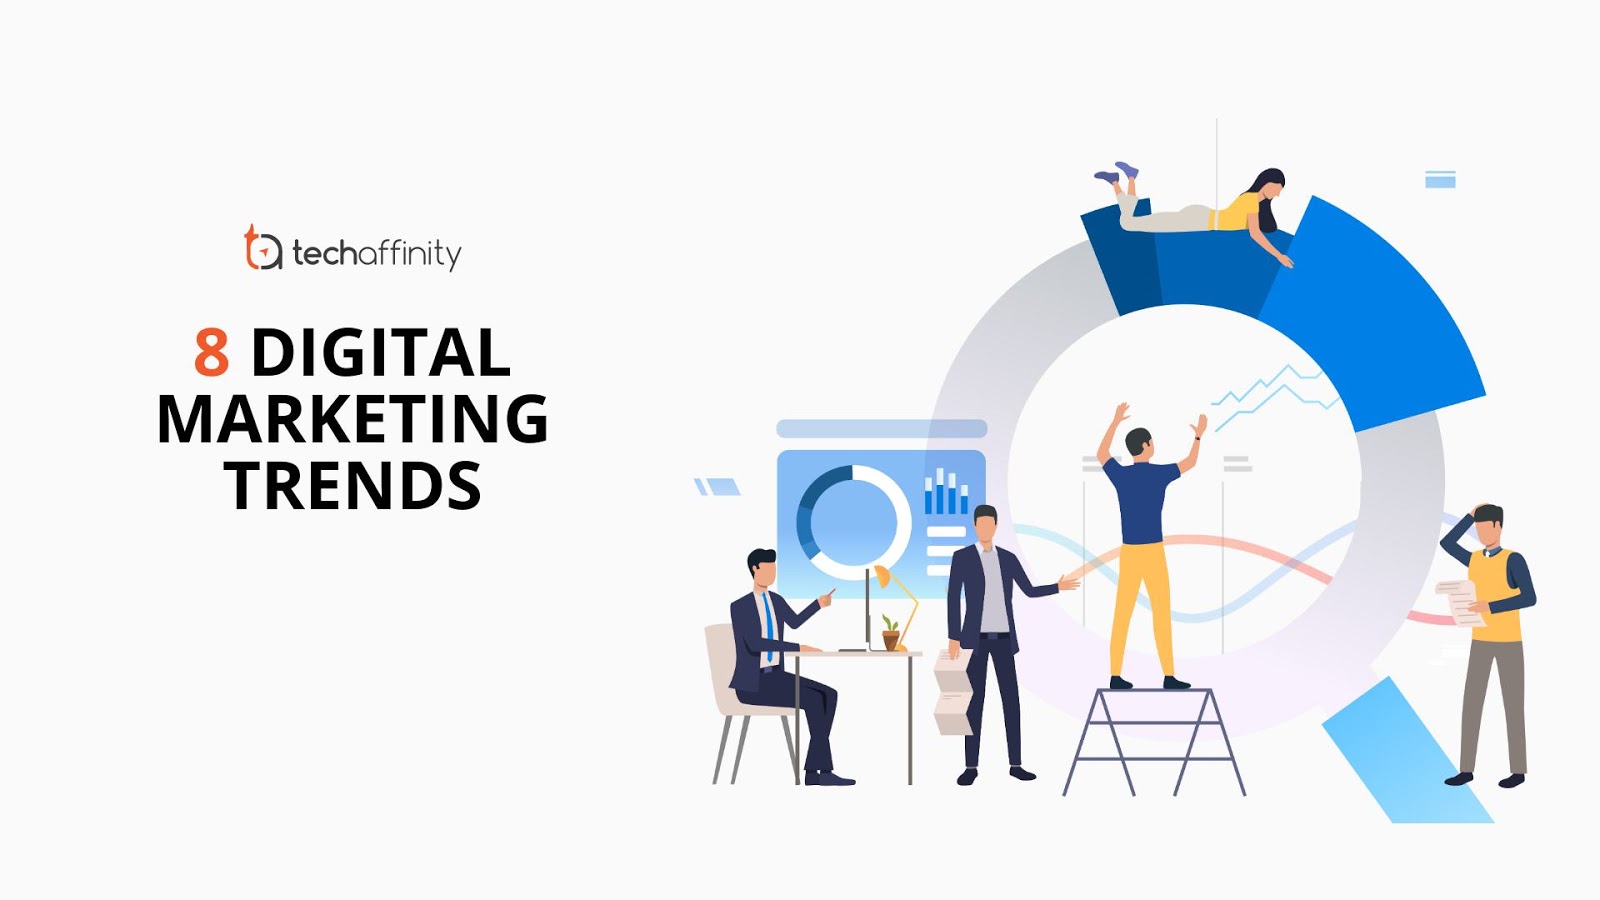 8 Digital Marketing Tricks To Grow Your Business in 2019